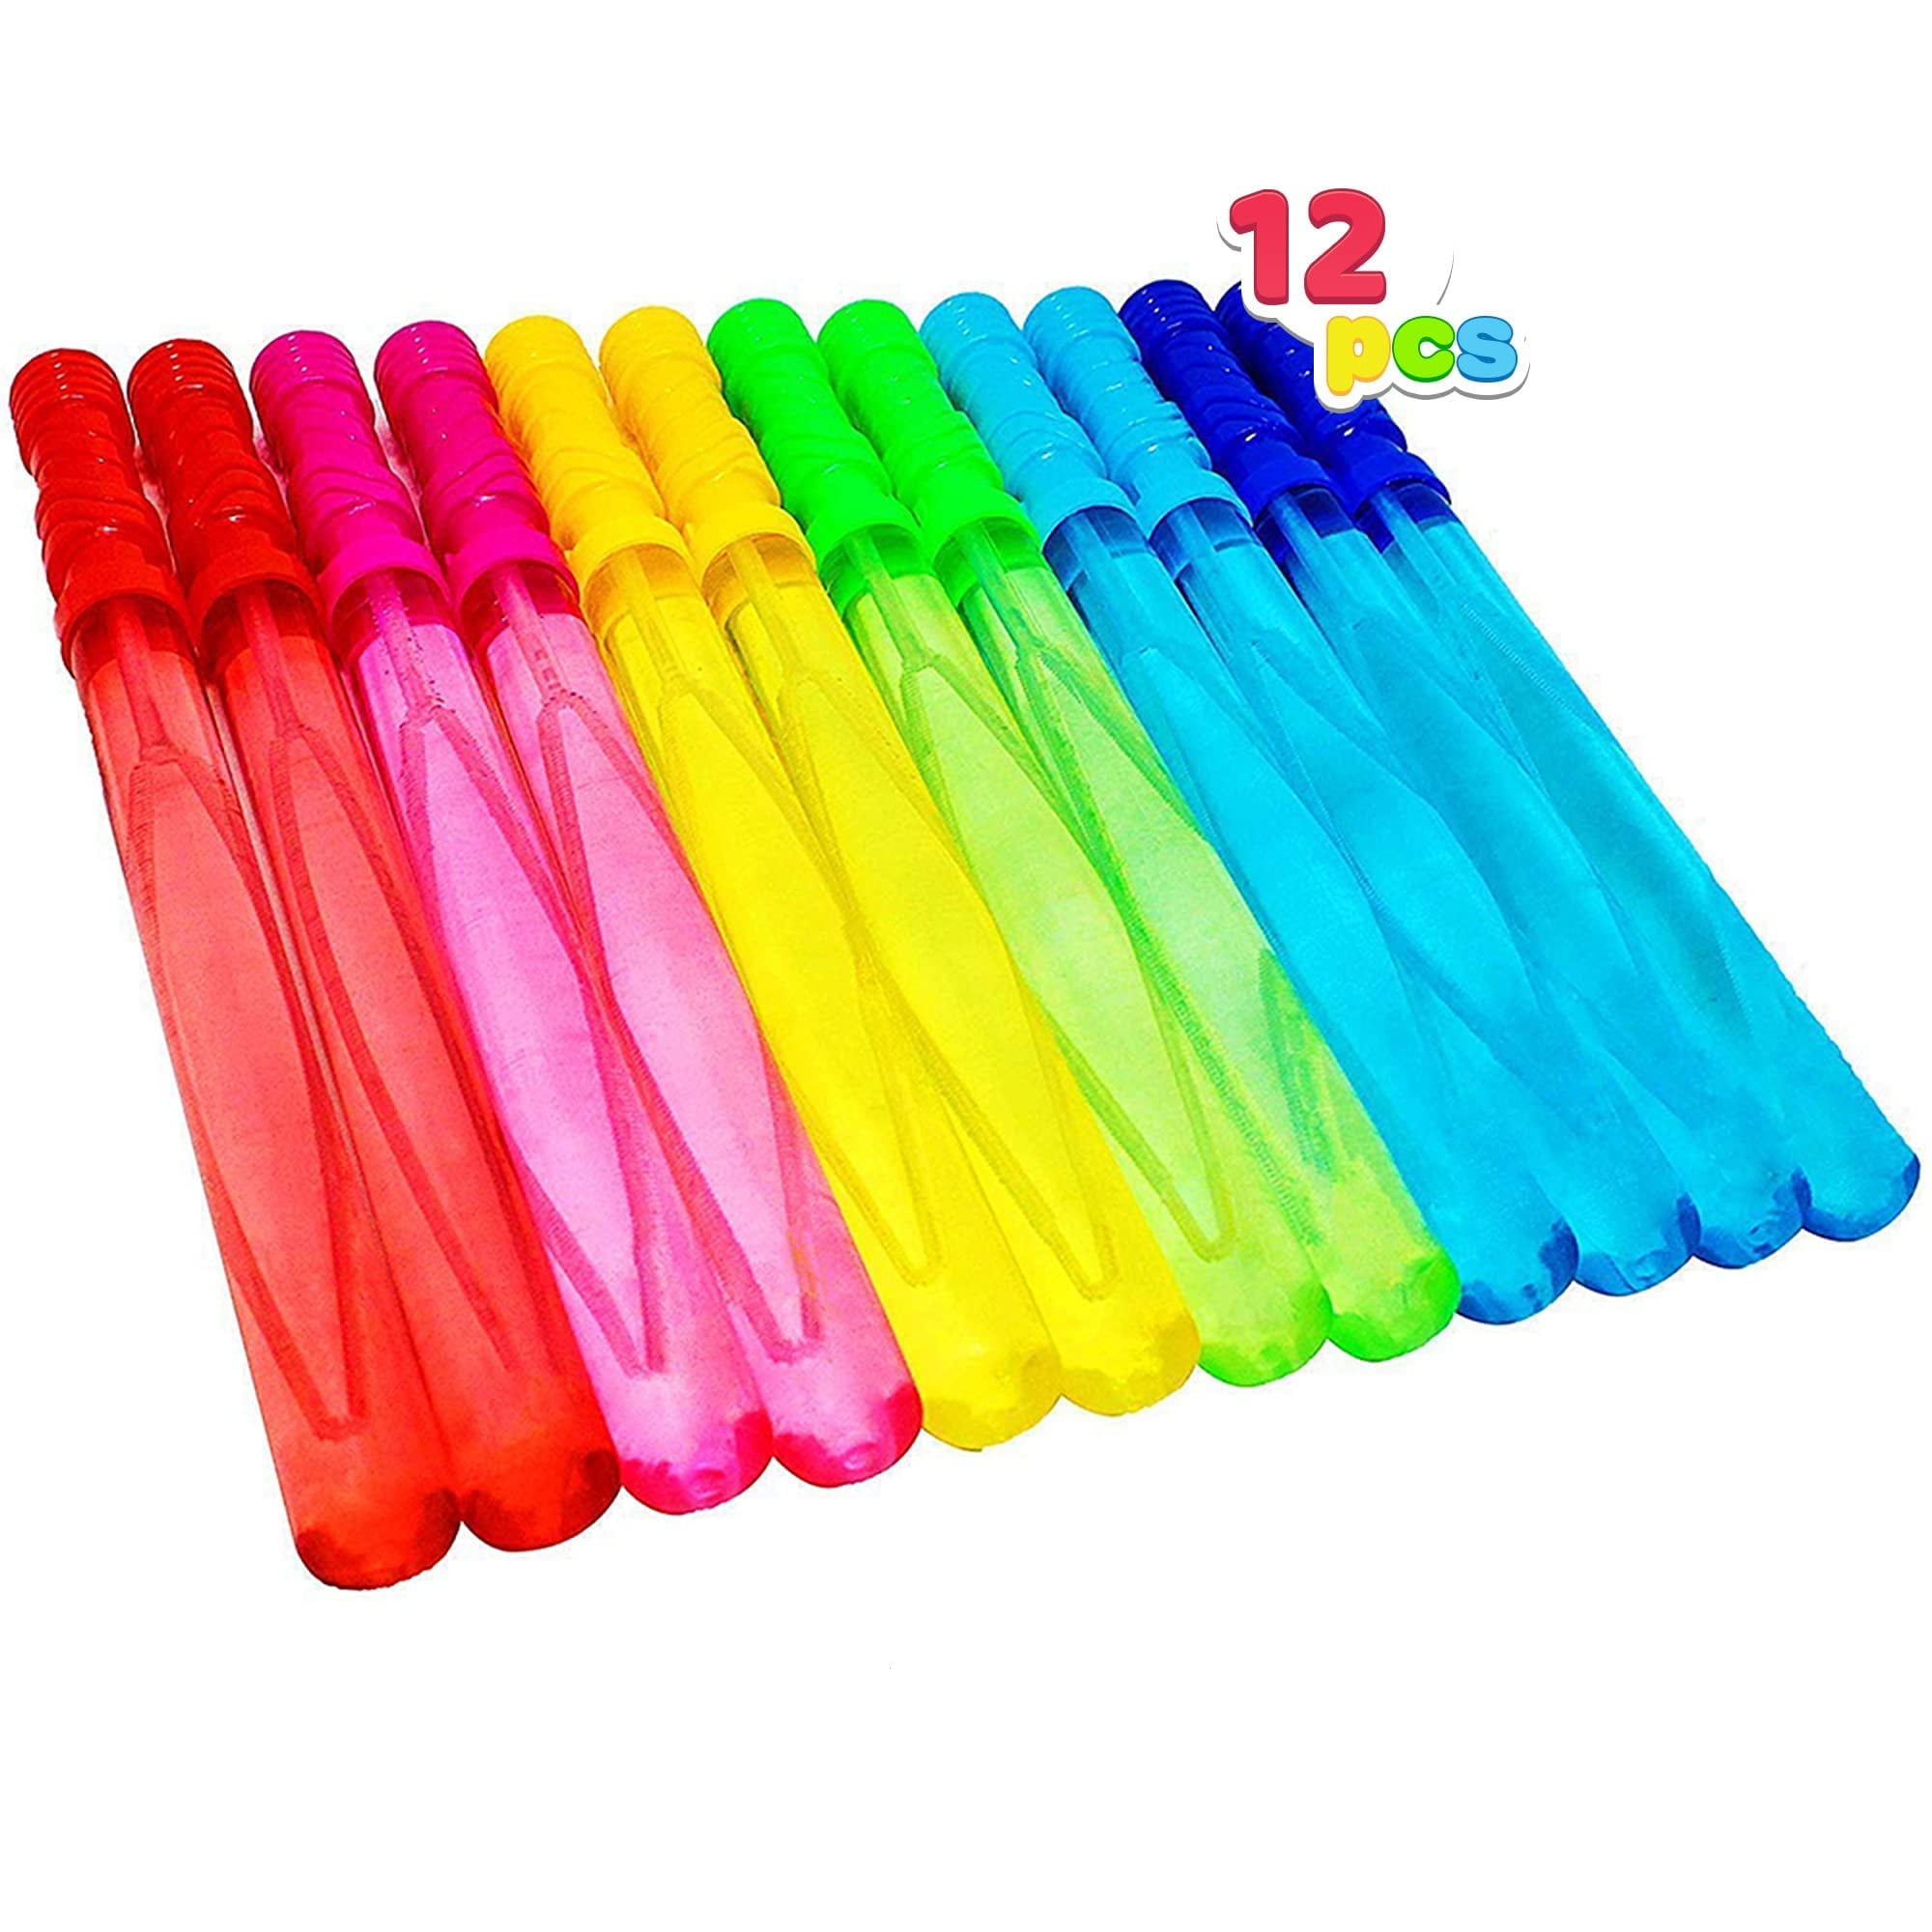 JOYIN 200 PCS Mini Glow Sticks Bulk with 8 Colors for Party Supplies, Glow- in-The-Dark, Easter Party Favor 